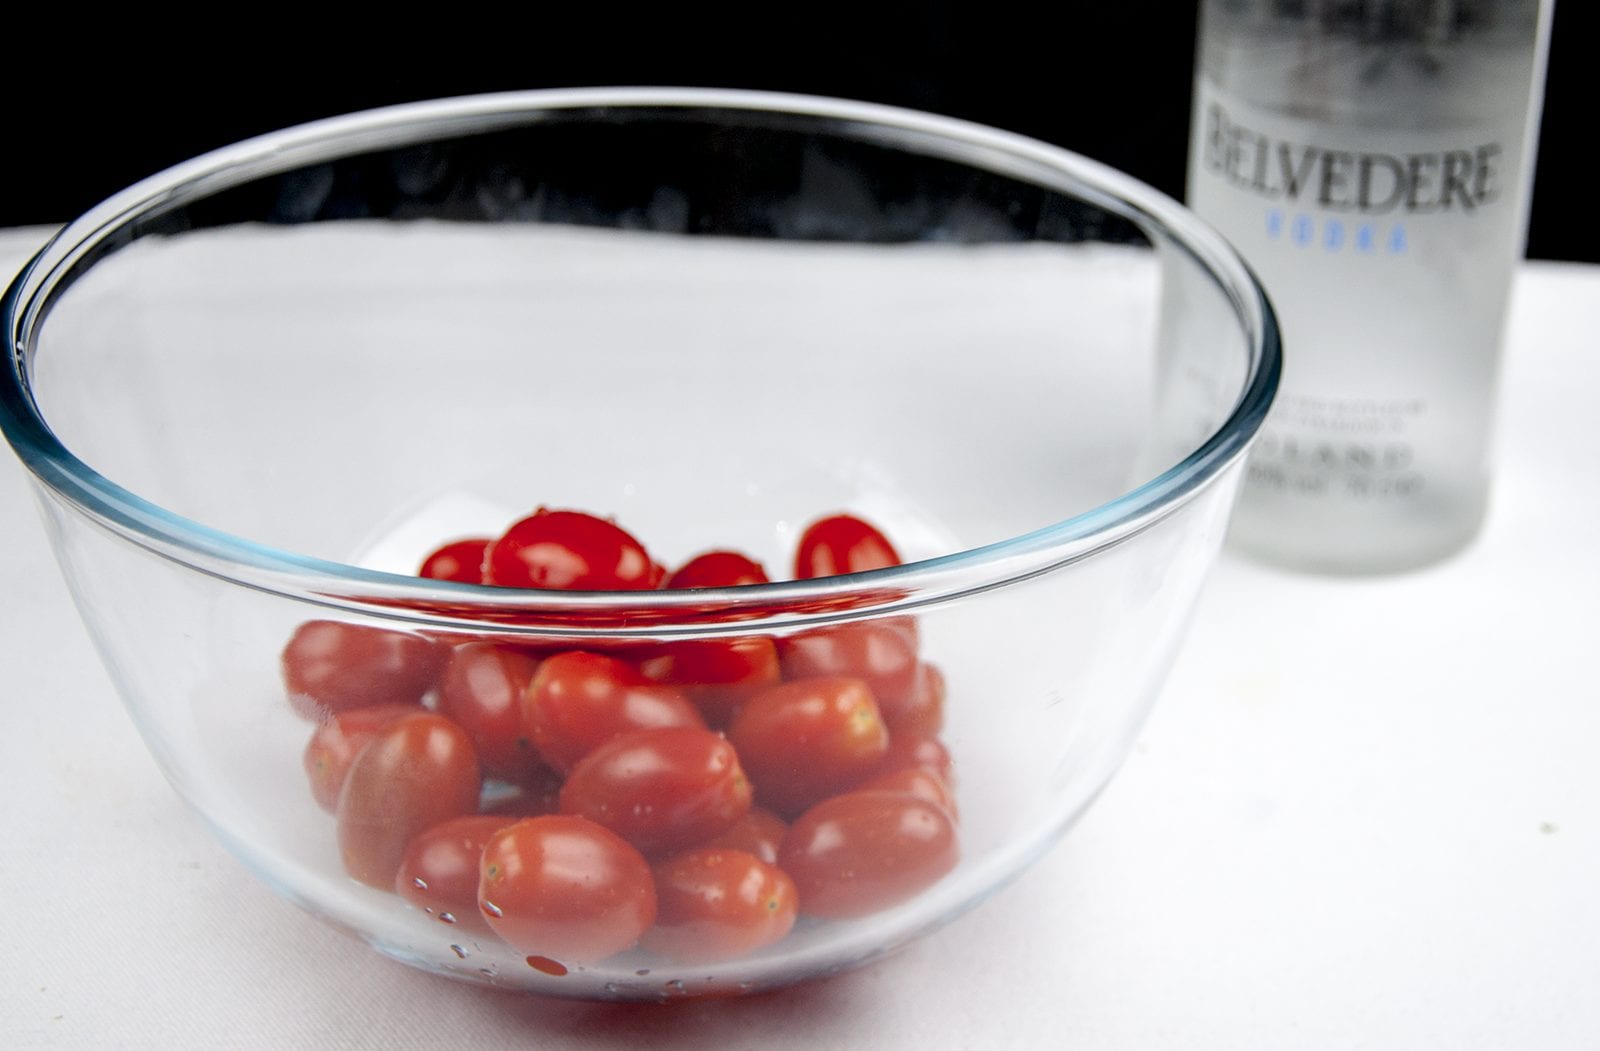 Having your mates around for a bit of a bash? Try making these Drunken Tomatoes. The healthy way to start the party!! ???? Haha! | theyumyumclub.com